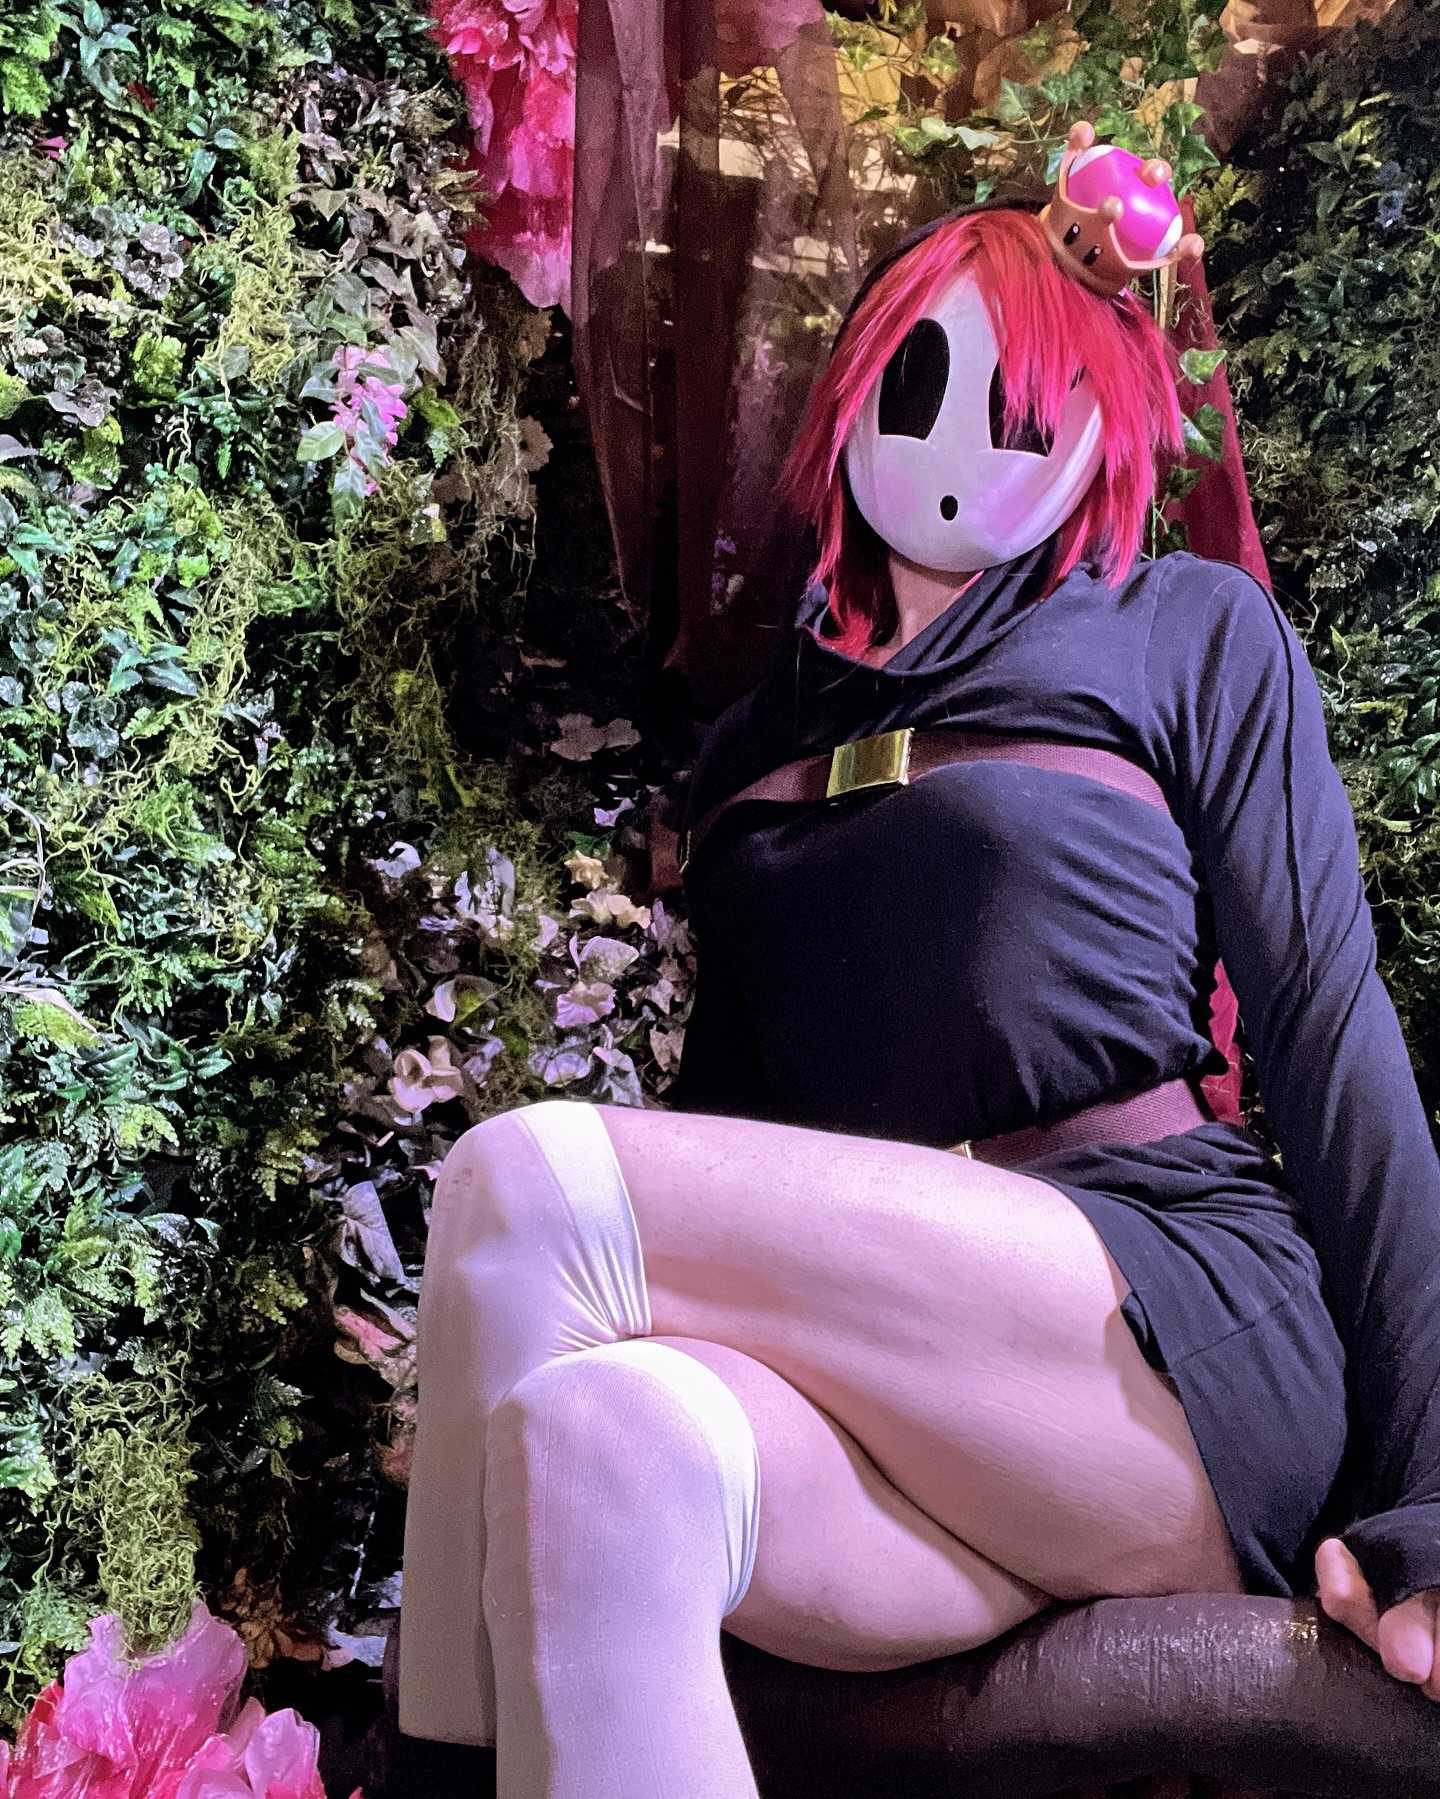 Do you enjoy shygals? If you do maybe you could give me a like. You don’t have to of course. I hope you are having a good day. #shyguy #cosplay #shyguycosplay #shygal #mariobros #curvy #mask